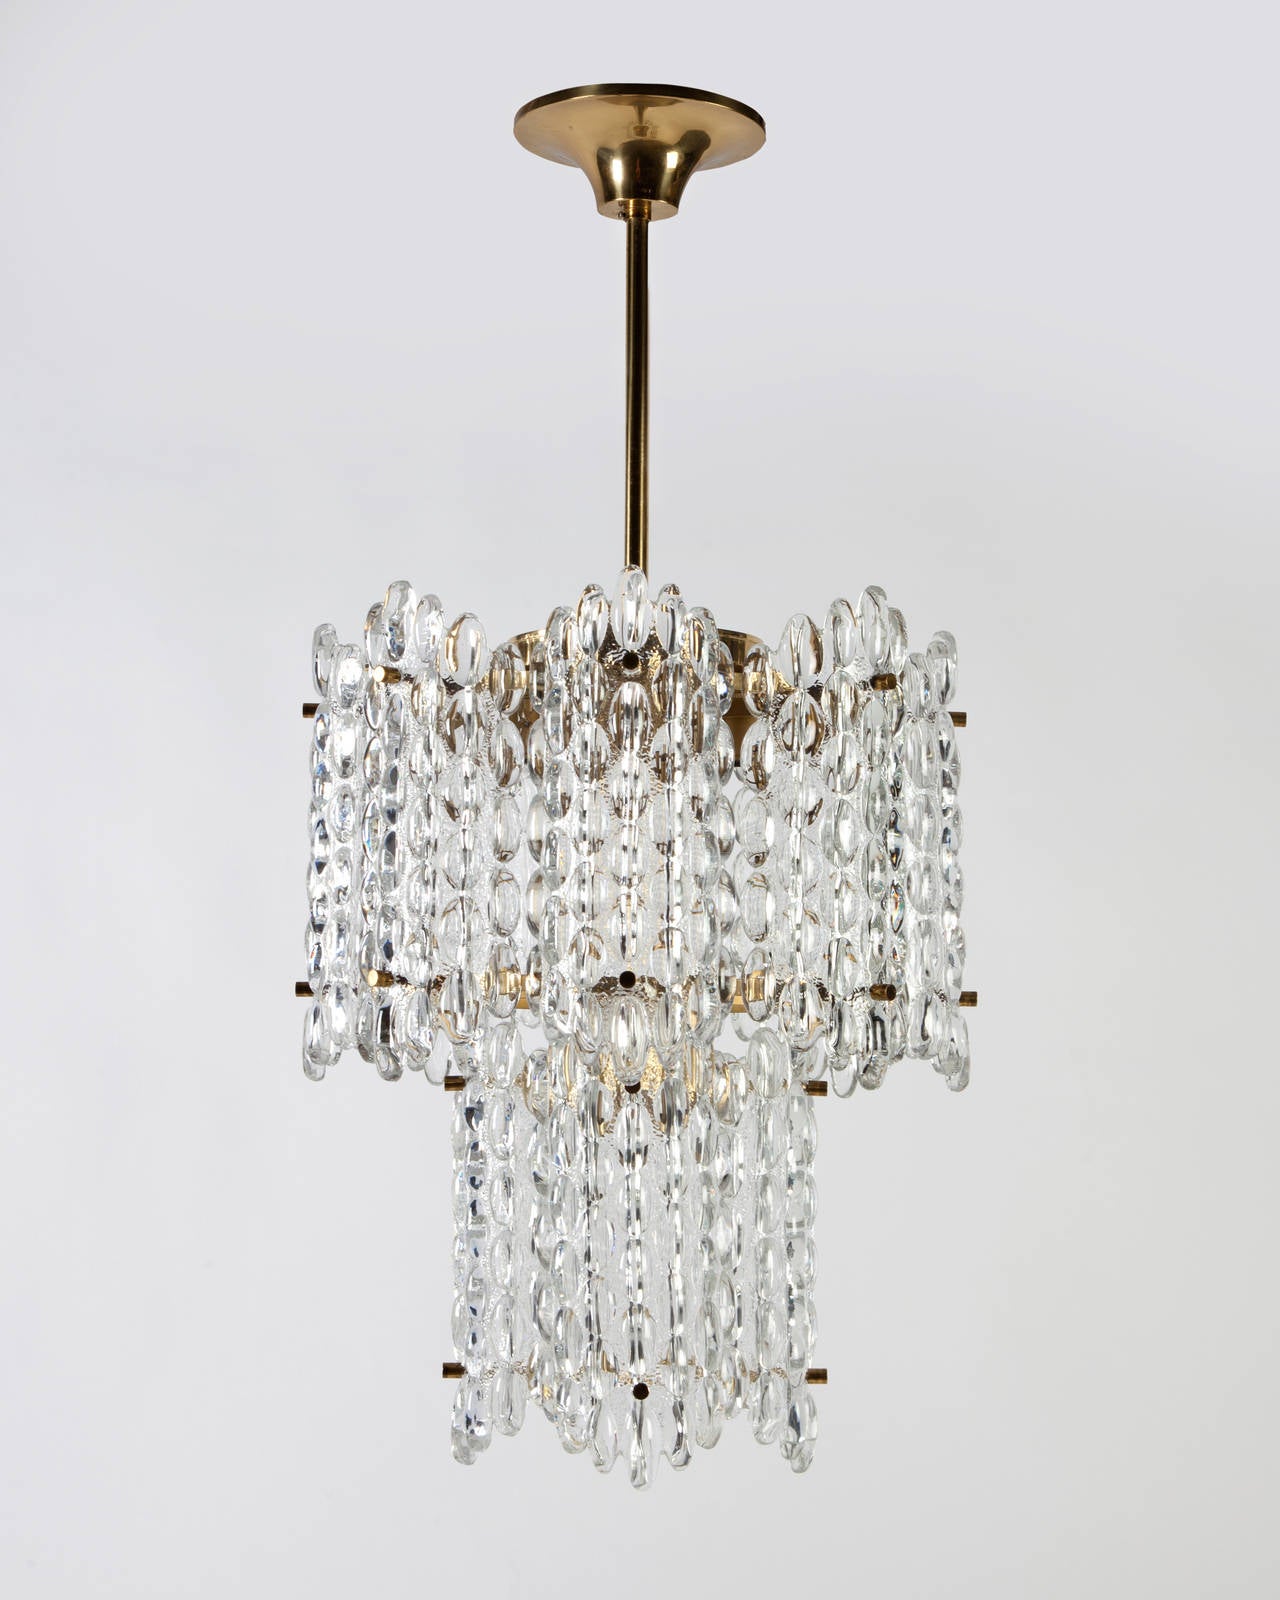 AHL3871

Circa 1950
A vintage chandelier with two tiers of textured curved glass panels on a brass frame. Designed by Carl Fagerlund for the Swedish glassmaker Orrefors. Due to the antique nature of this fixture, there may be some nicks or